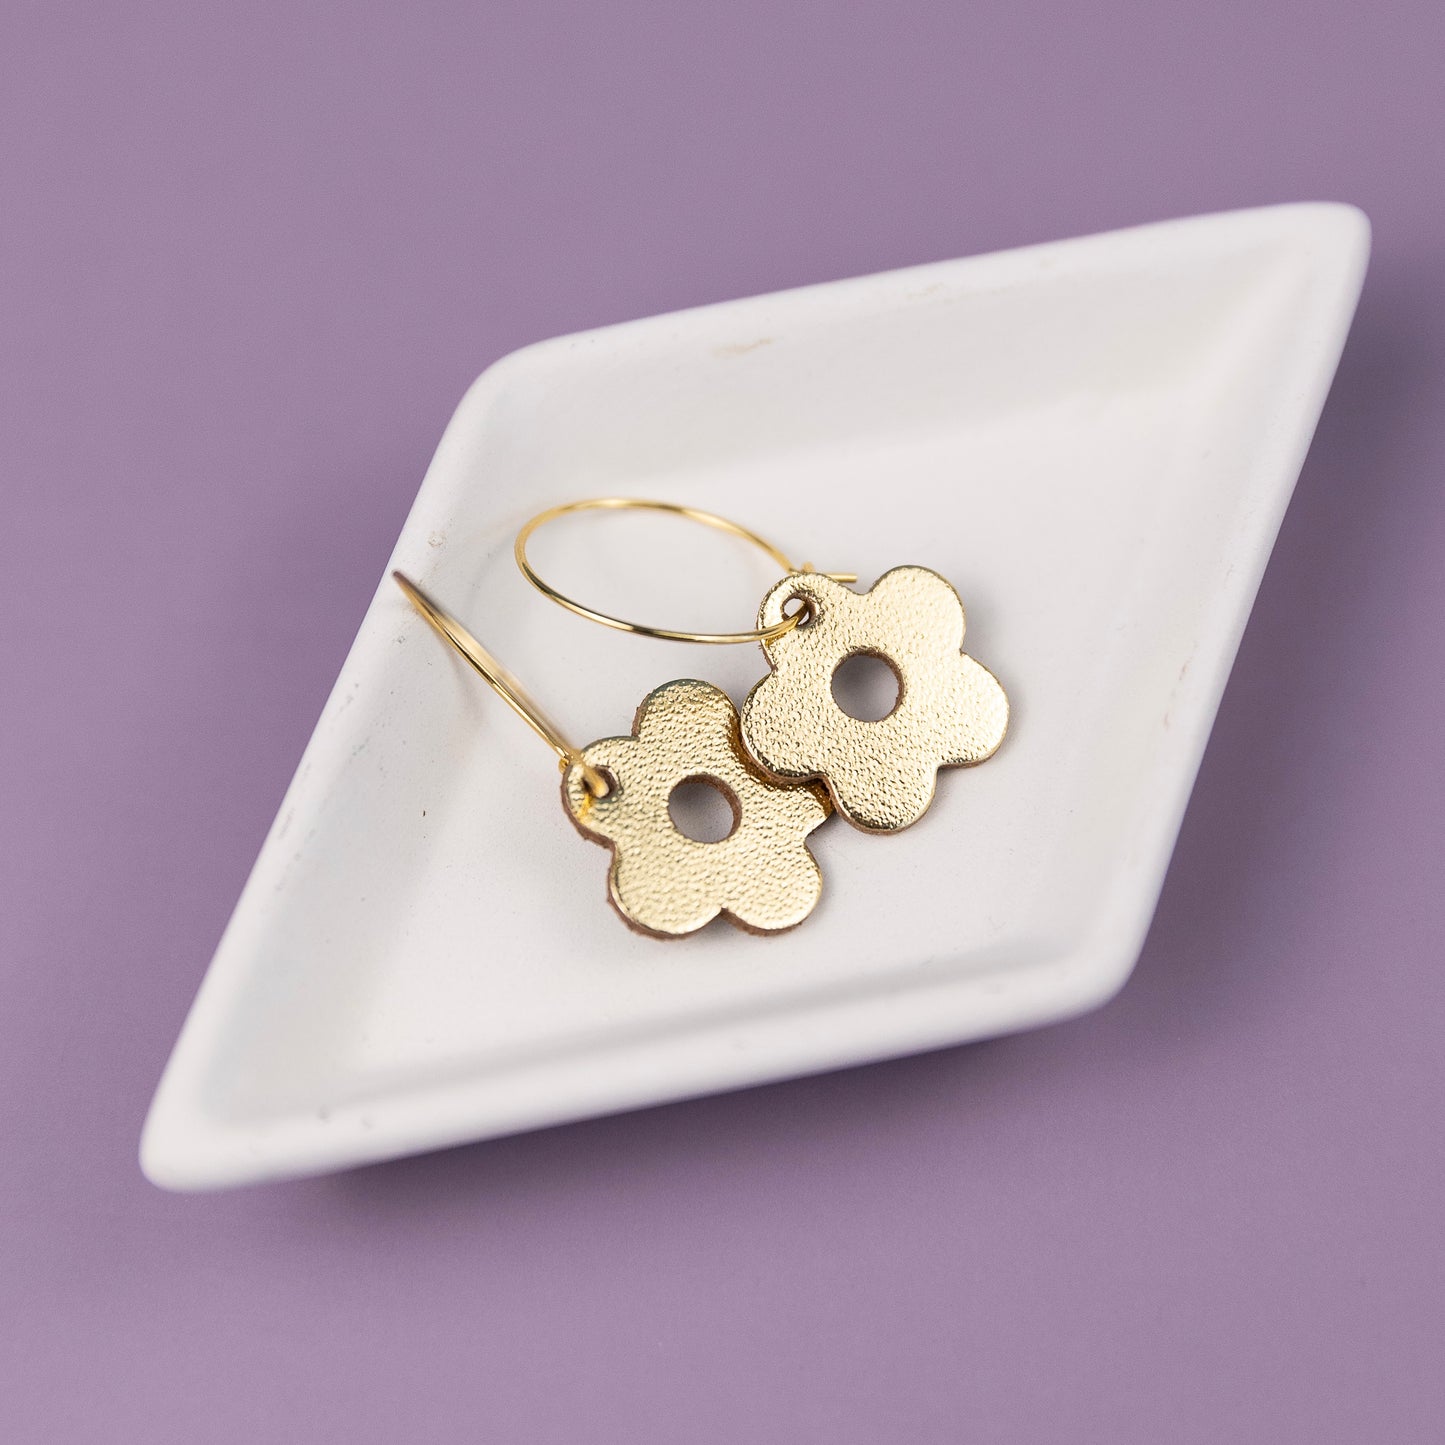 THE LEATHER DAISY HOOP in Gold/ Lightweight Statement Earrings